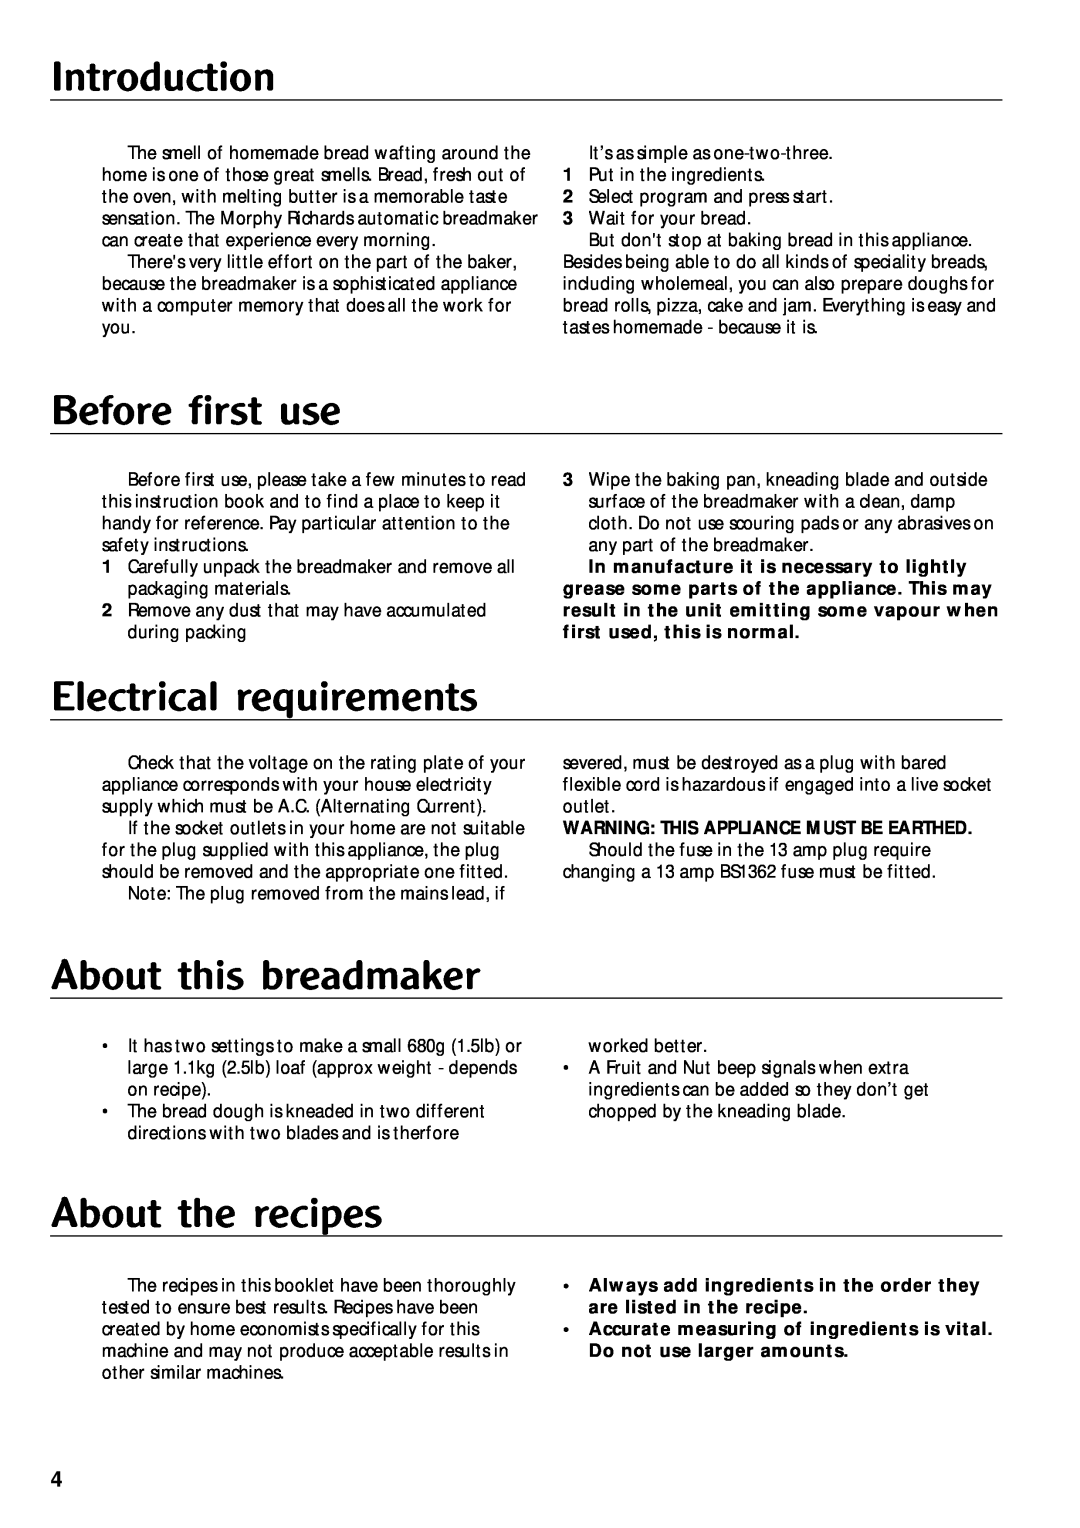 Morphy Richards Bread Maker manual Introduction, Before first use, Electrical requirements, About this breadmaker 